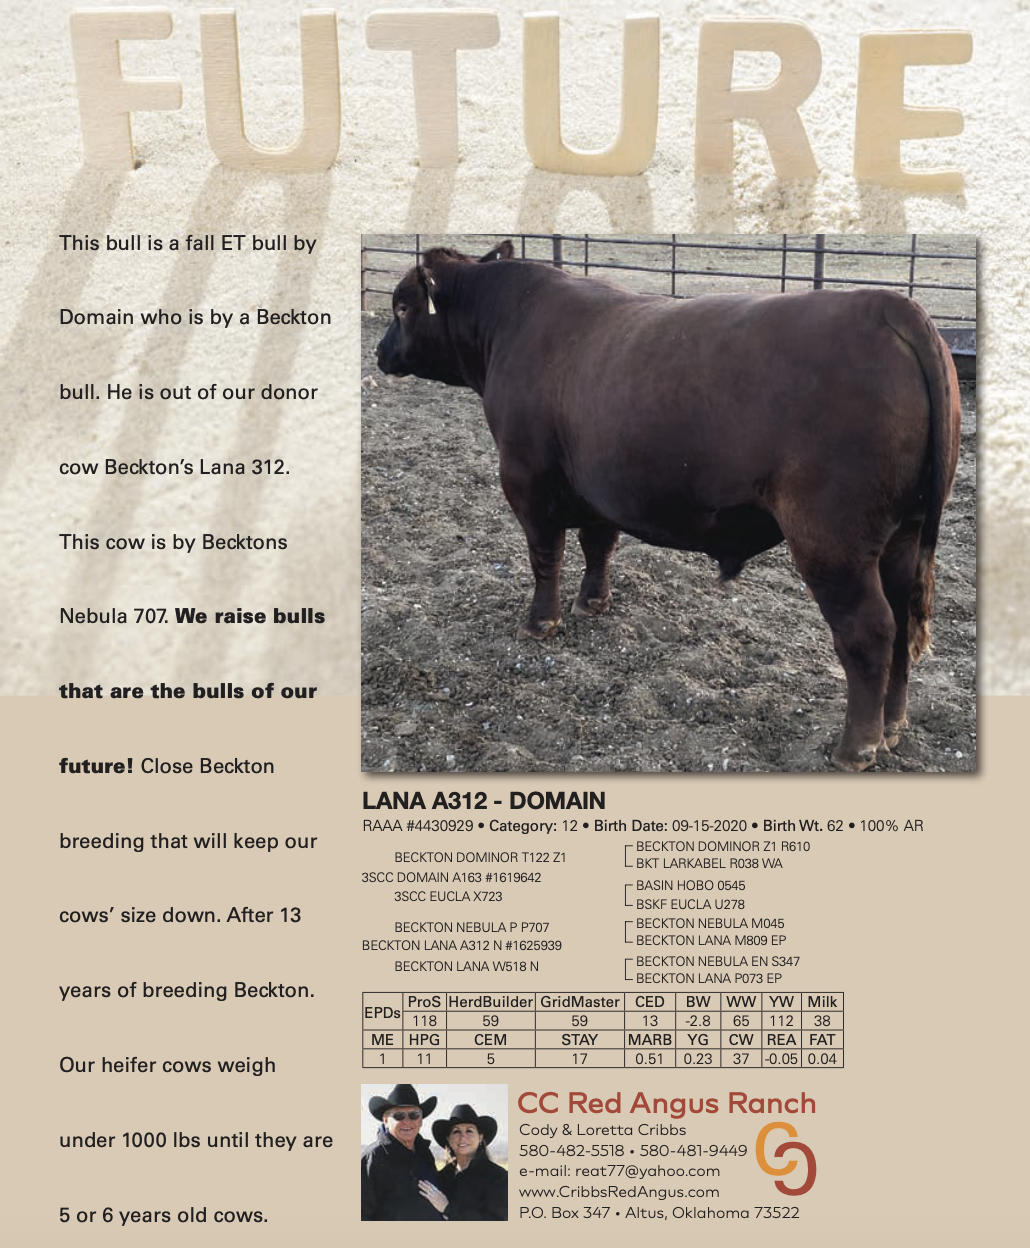 This bull is currently available for sale through Private Treaty